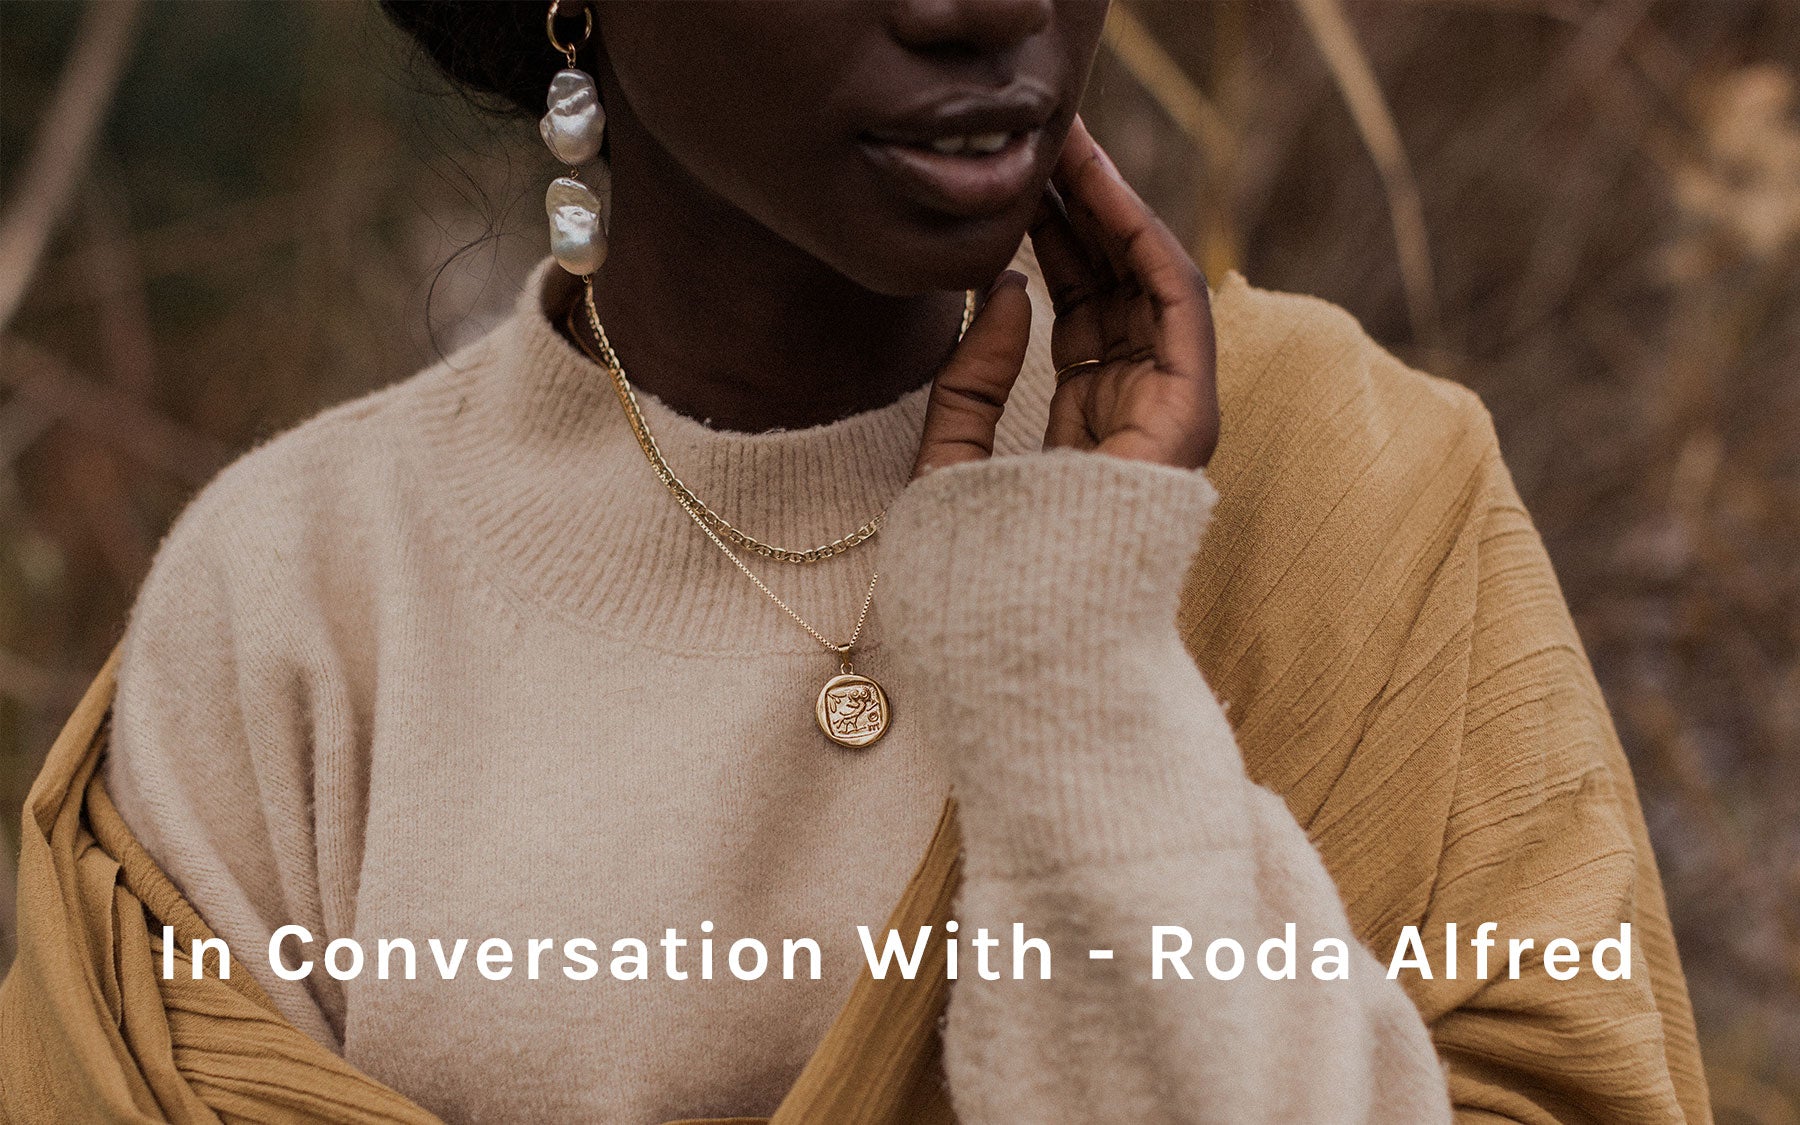 In Conversation With - Roda Alfred